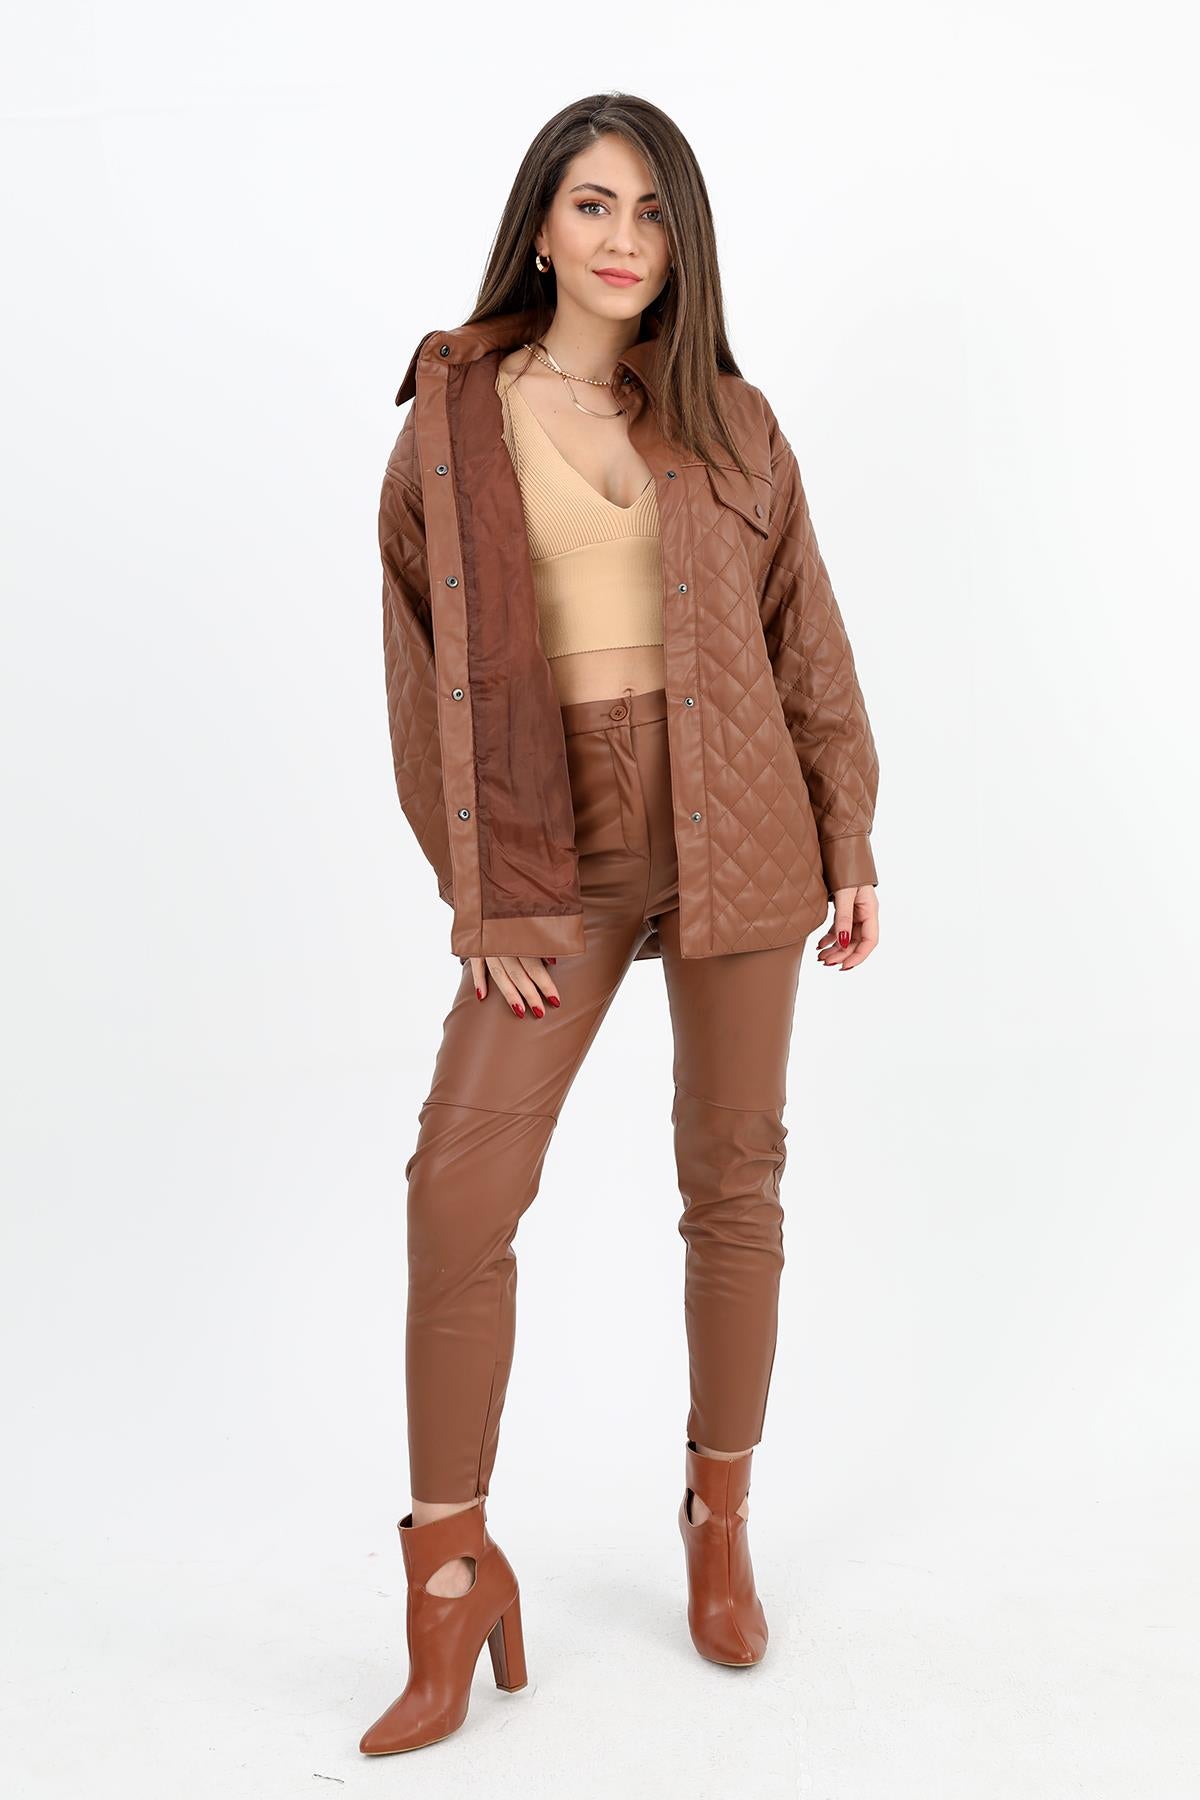 Women's Leather Coat with Pocket Flap Quilted - Brown - STREETMODE ™